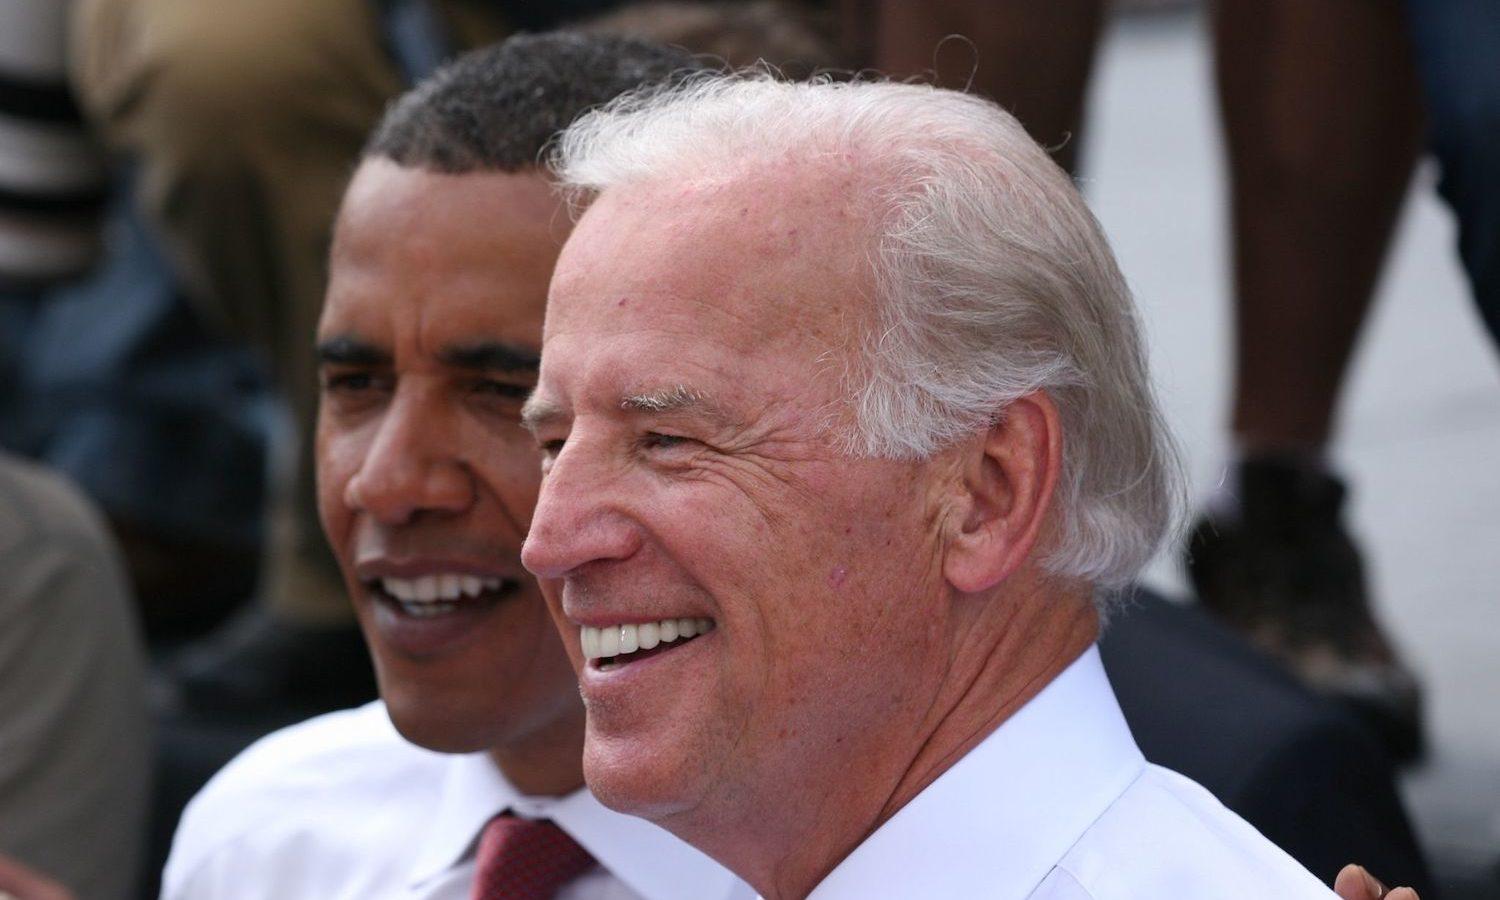 Joe Biden and Barack Obama in Springfield, Illinois, right after Biden was formerly introduced by Obama as his running mate. Daniel Schwen/CC BY-SA 4.0)